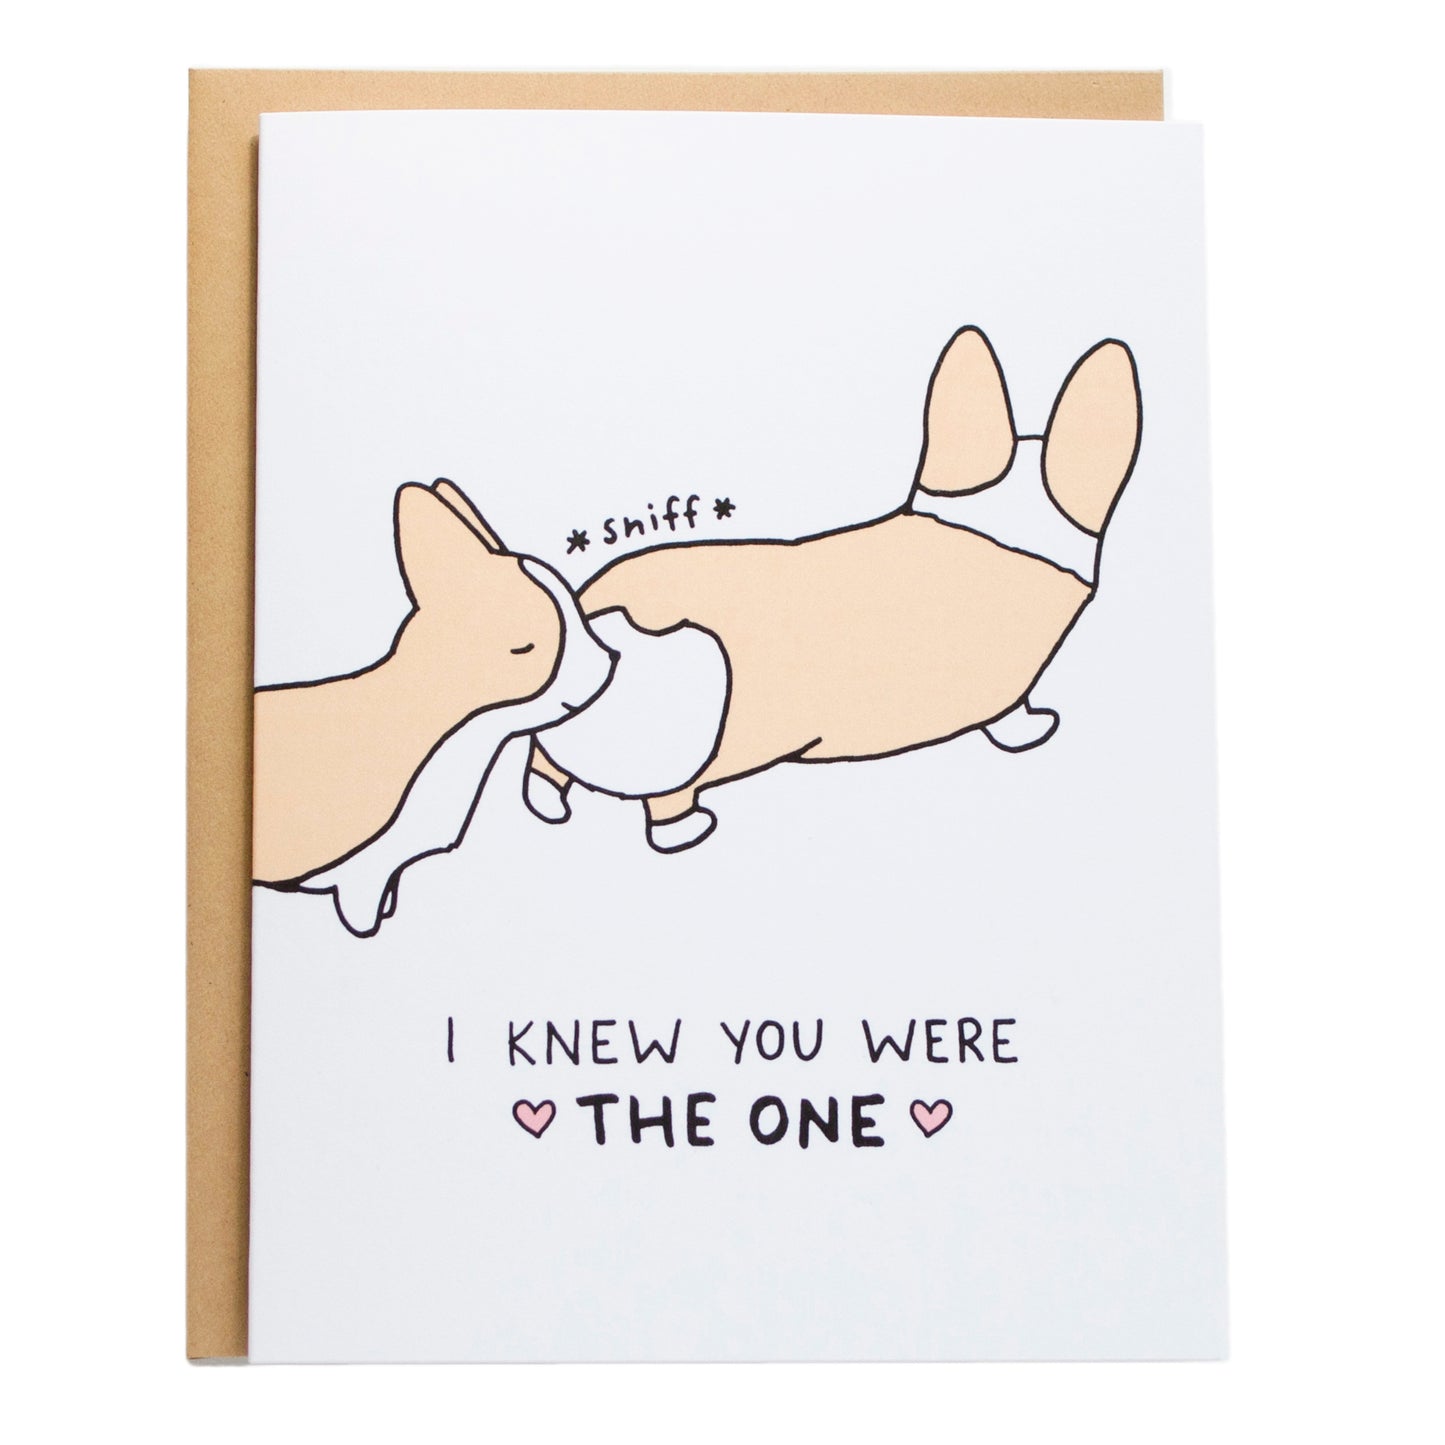 corgi sniffing another corgi's butt, card reads, i knew you were the one